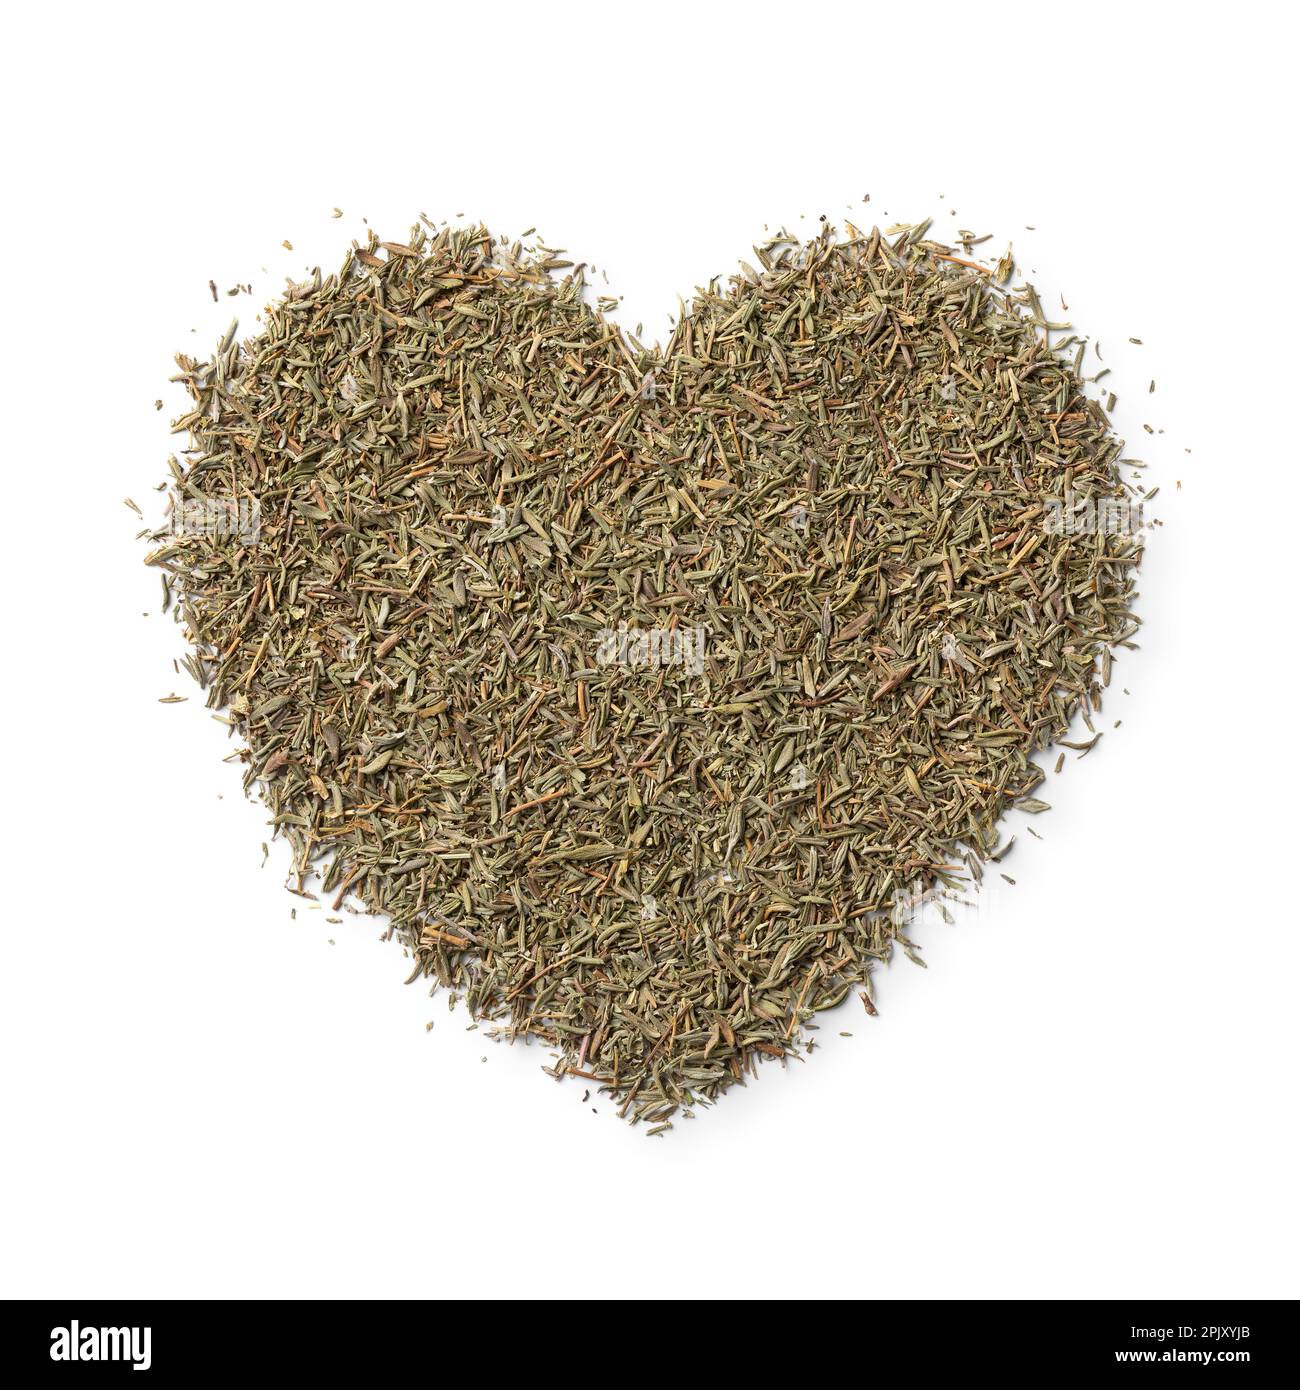 Dried Thyme in heart shape close up isolated on white background for seasoning Stock Photo